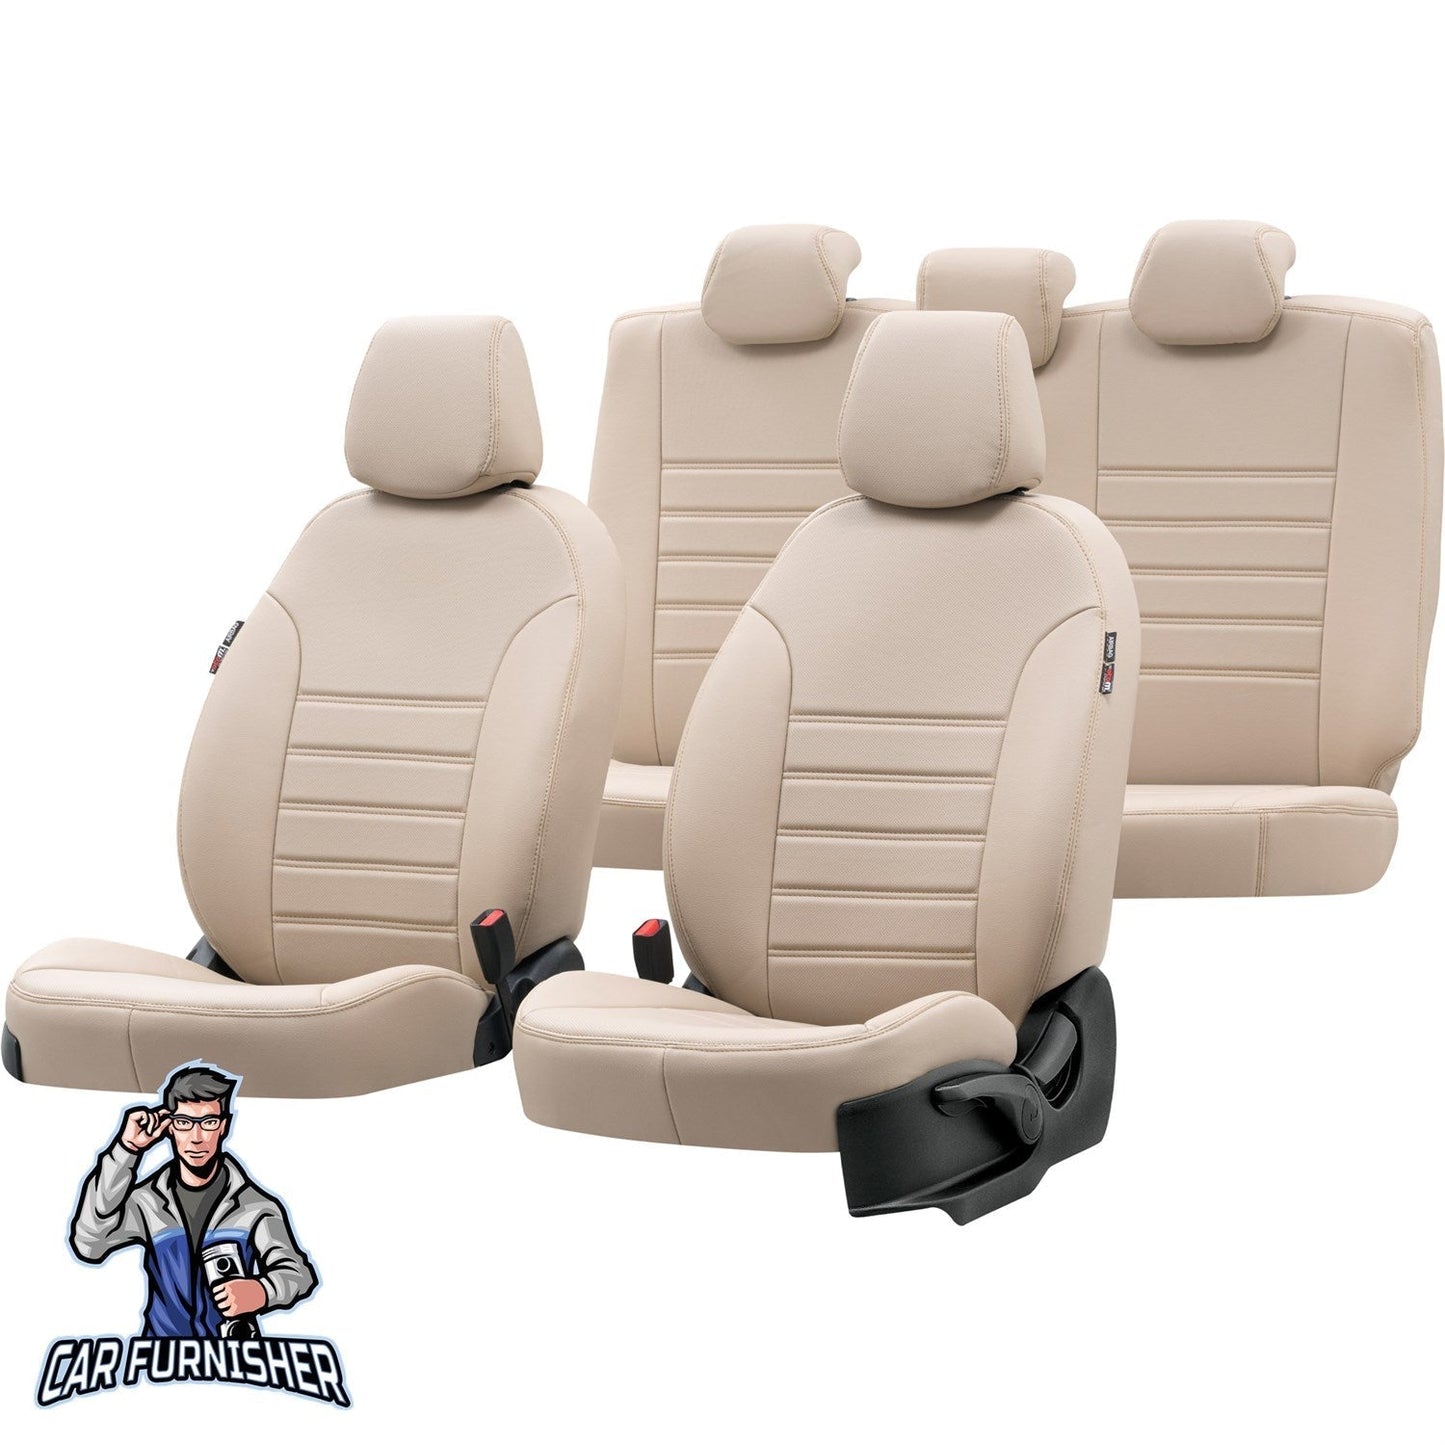 Skoda Roomstar Seat Cover Istanbul Leather Design Beige Leather